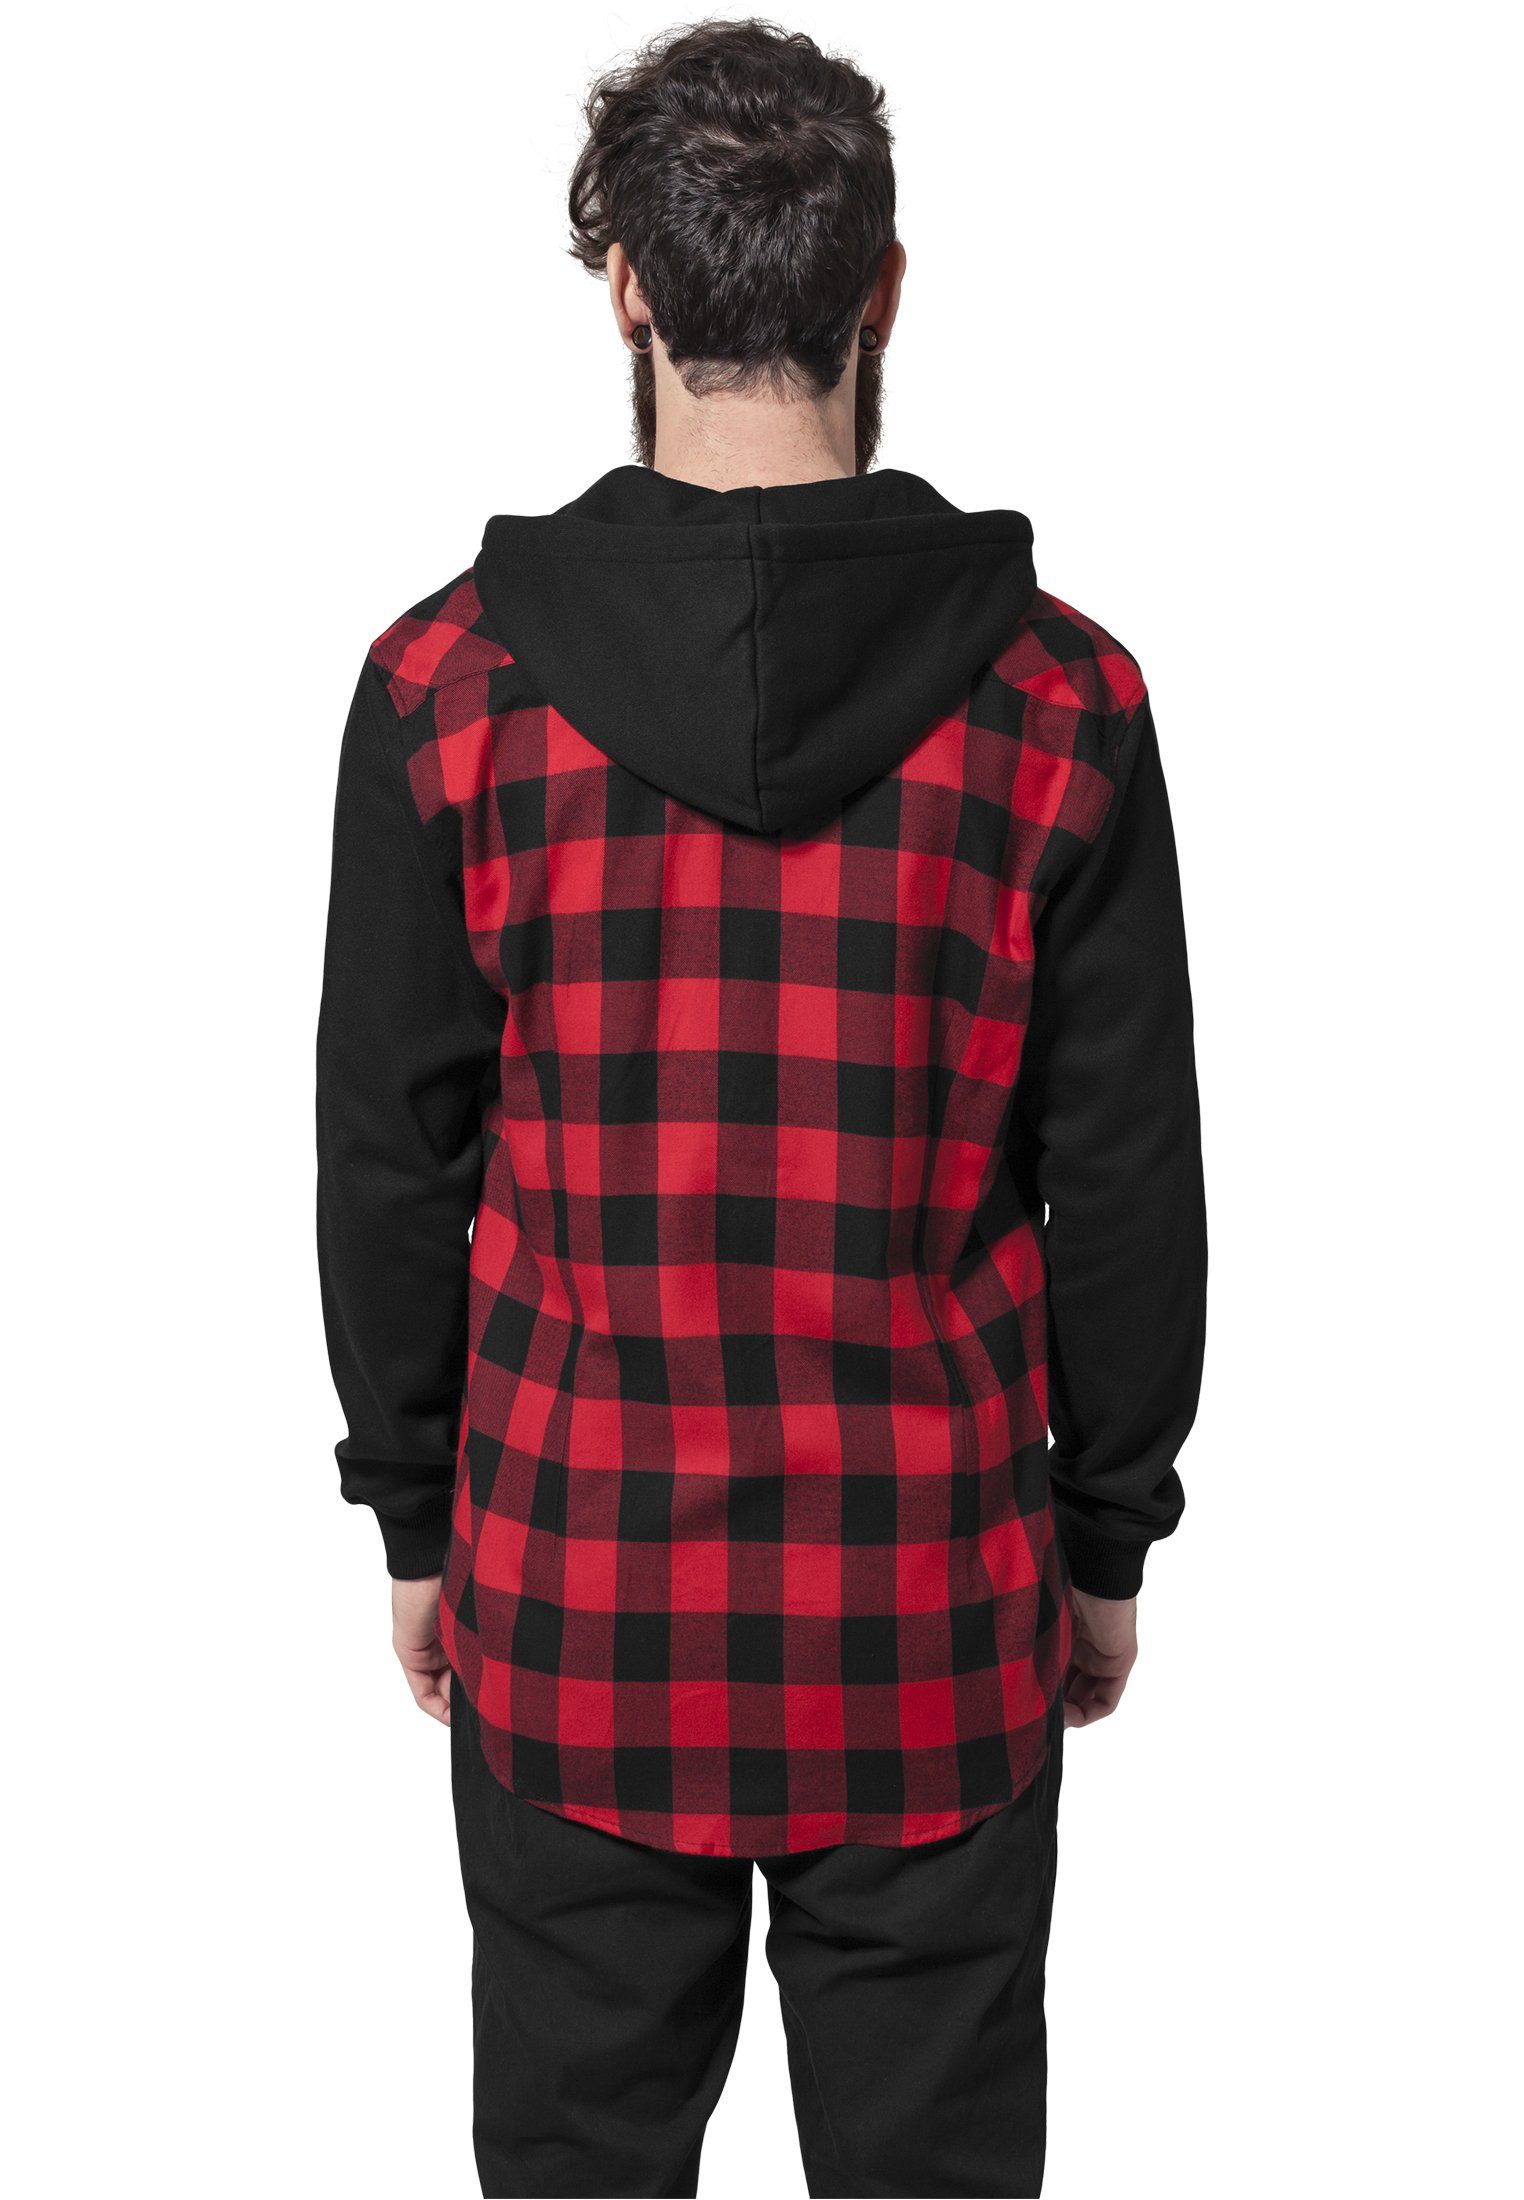 Sleeve Herren Checked Hooded URBAN blk/red/bl CLASSICS Sweat Shirtjacke Flanell Shirt (1-tlg)